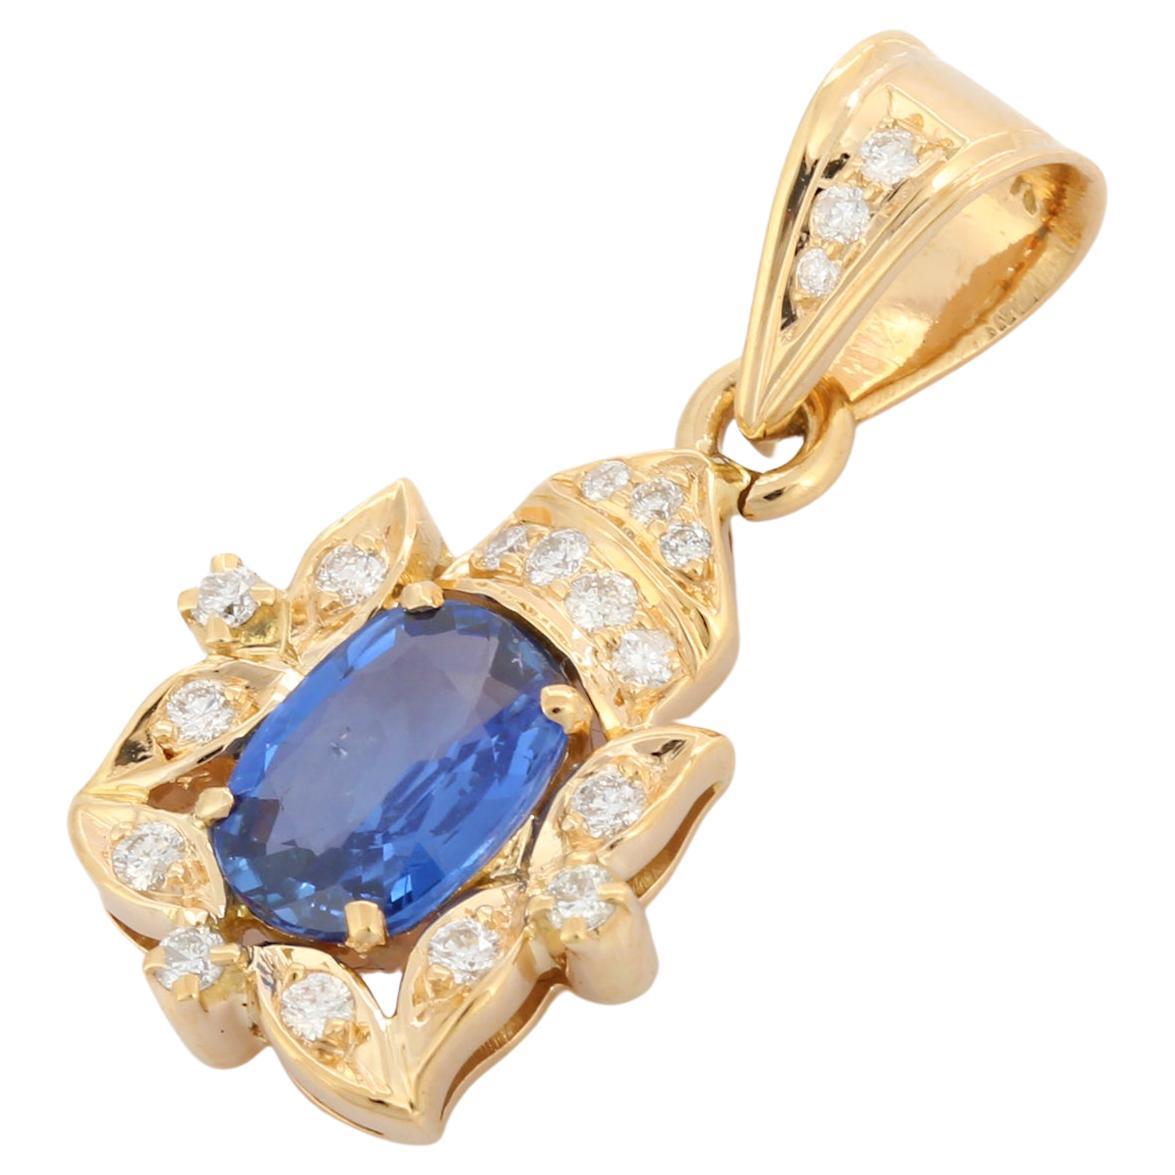 Contemporary 18K Yellow Gold Pendant with Blue Sapphire and Diamond